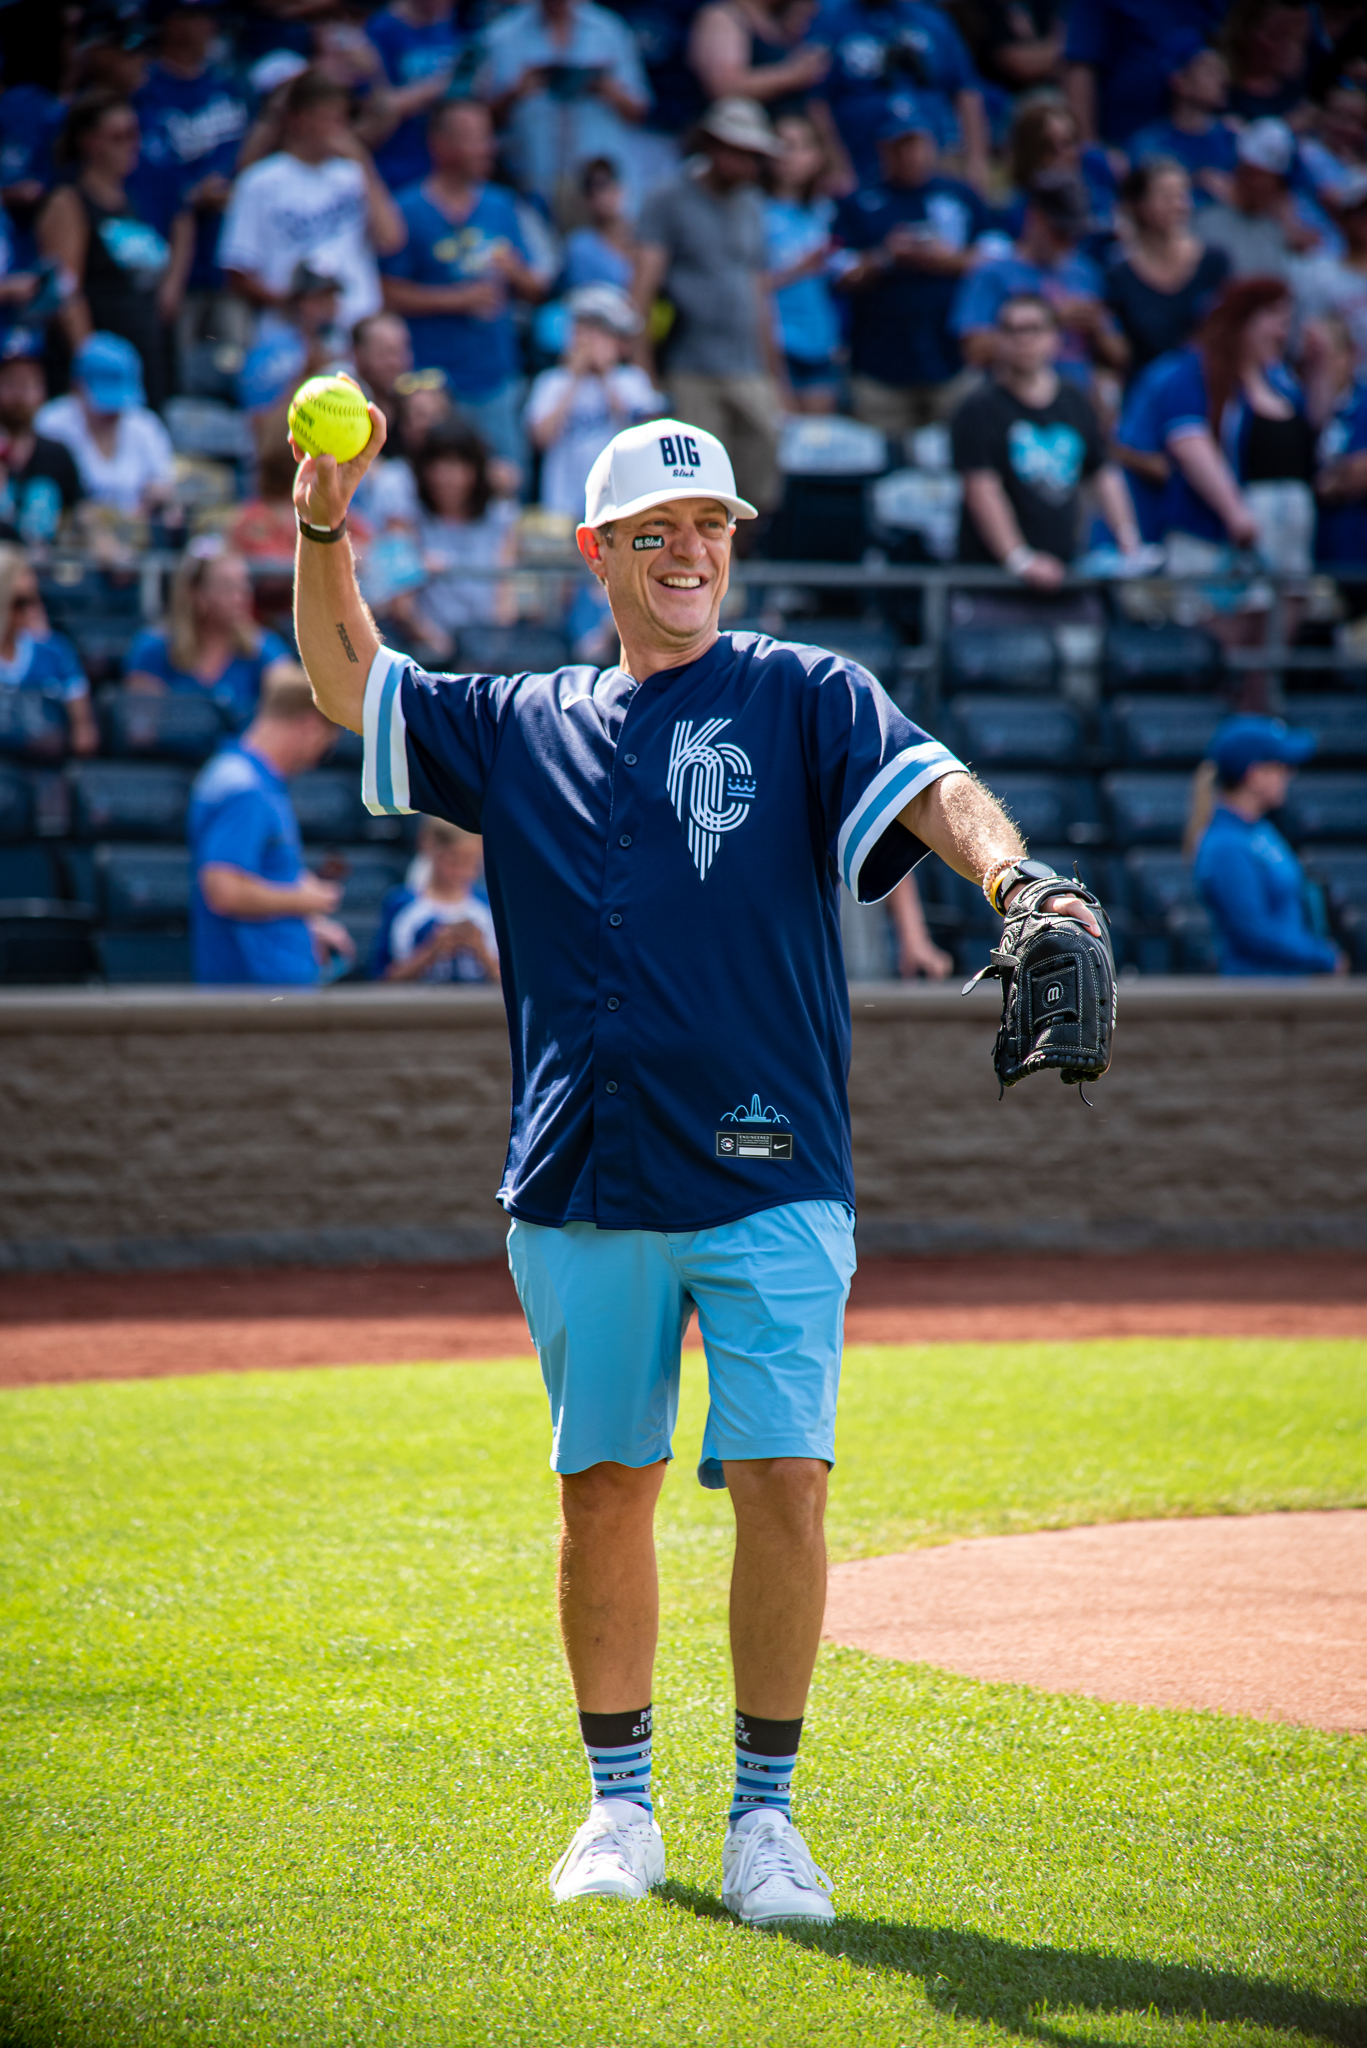 Photos: See the action from the Big Slick celebrity softball game